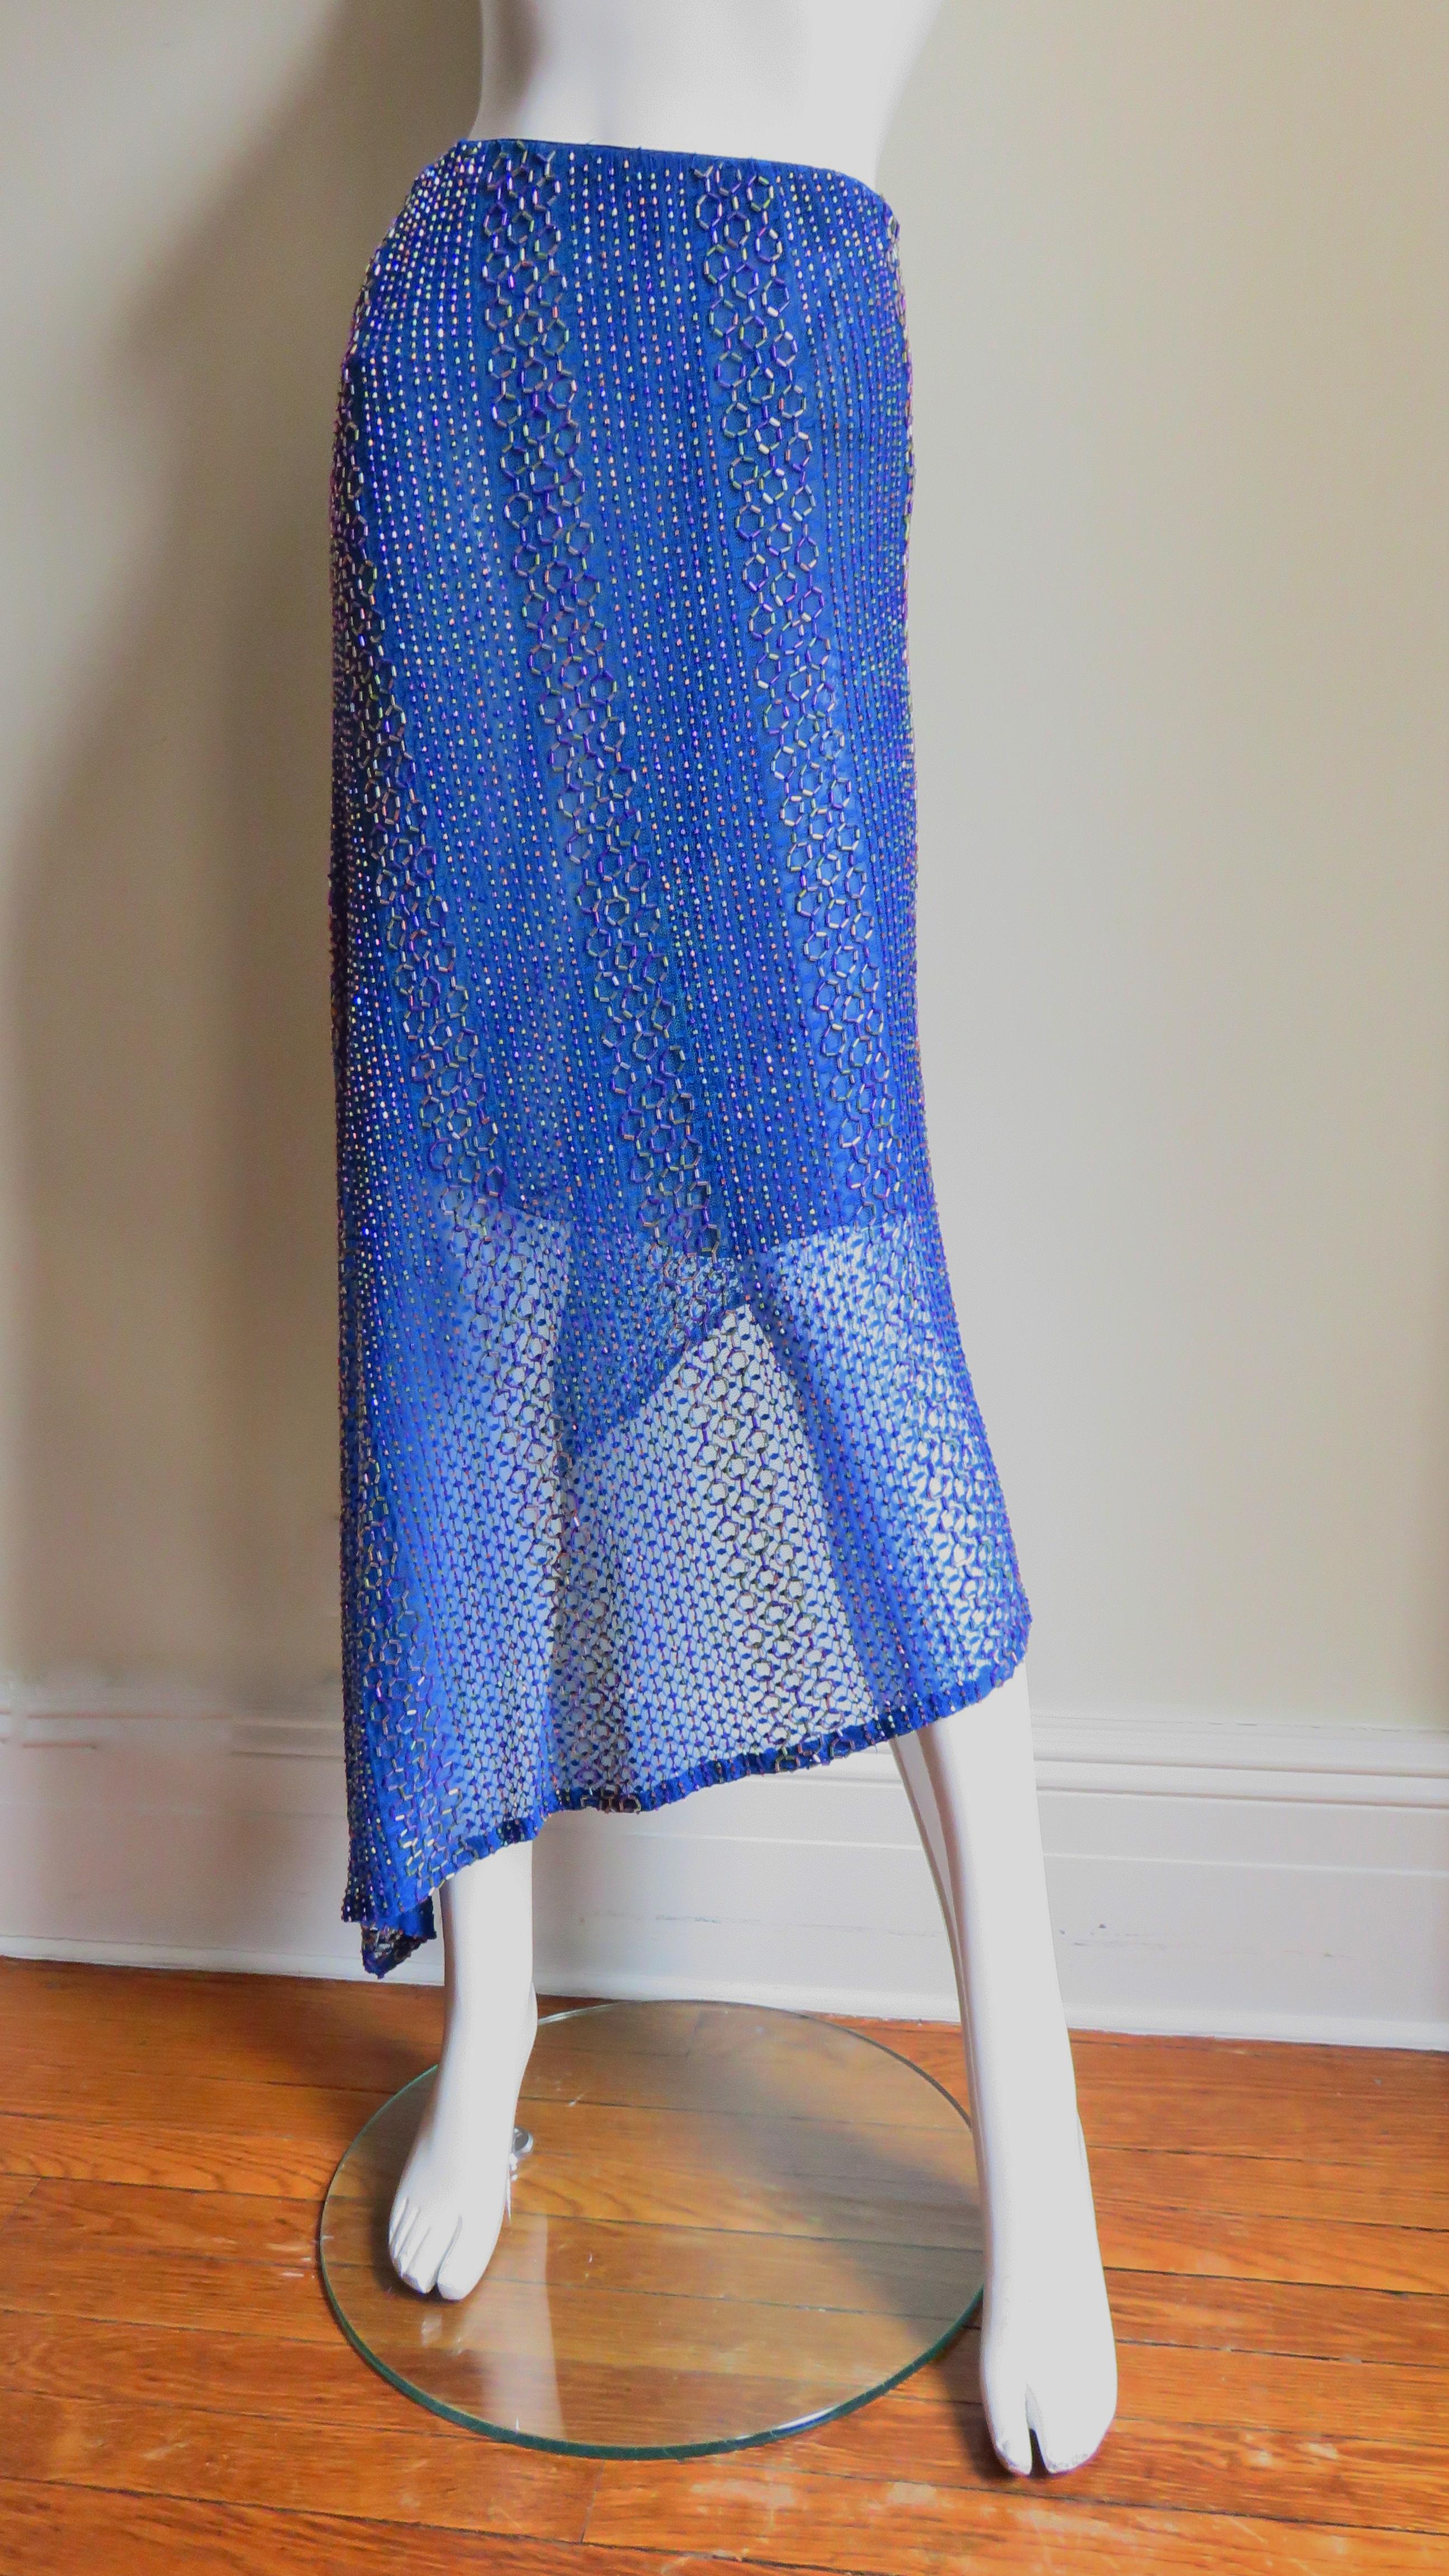 Ordinary People New Skirt with Beading In Excellent Condition For Sale In Water Mill, NY